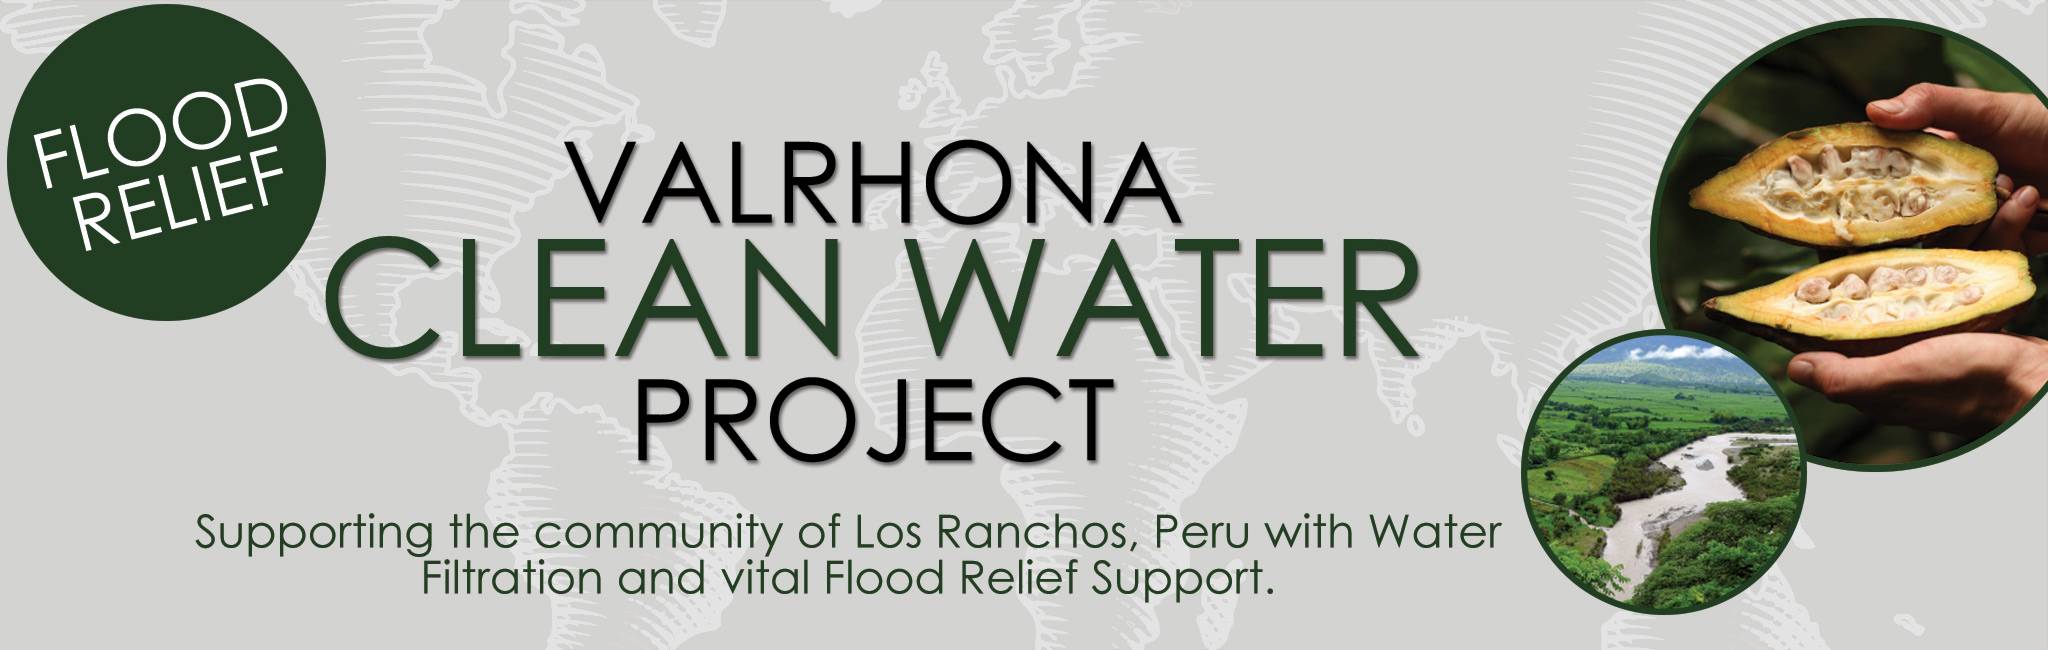 Valrhona Clean Water Project